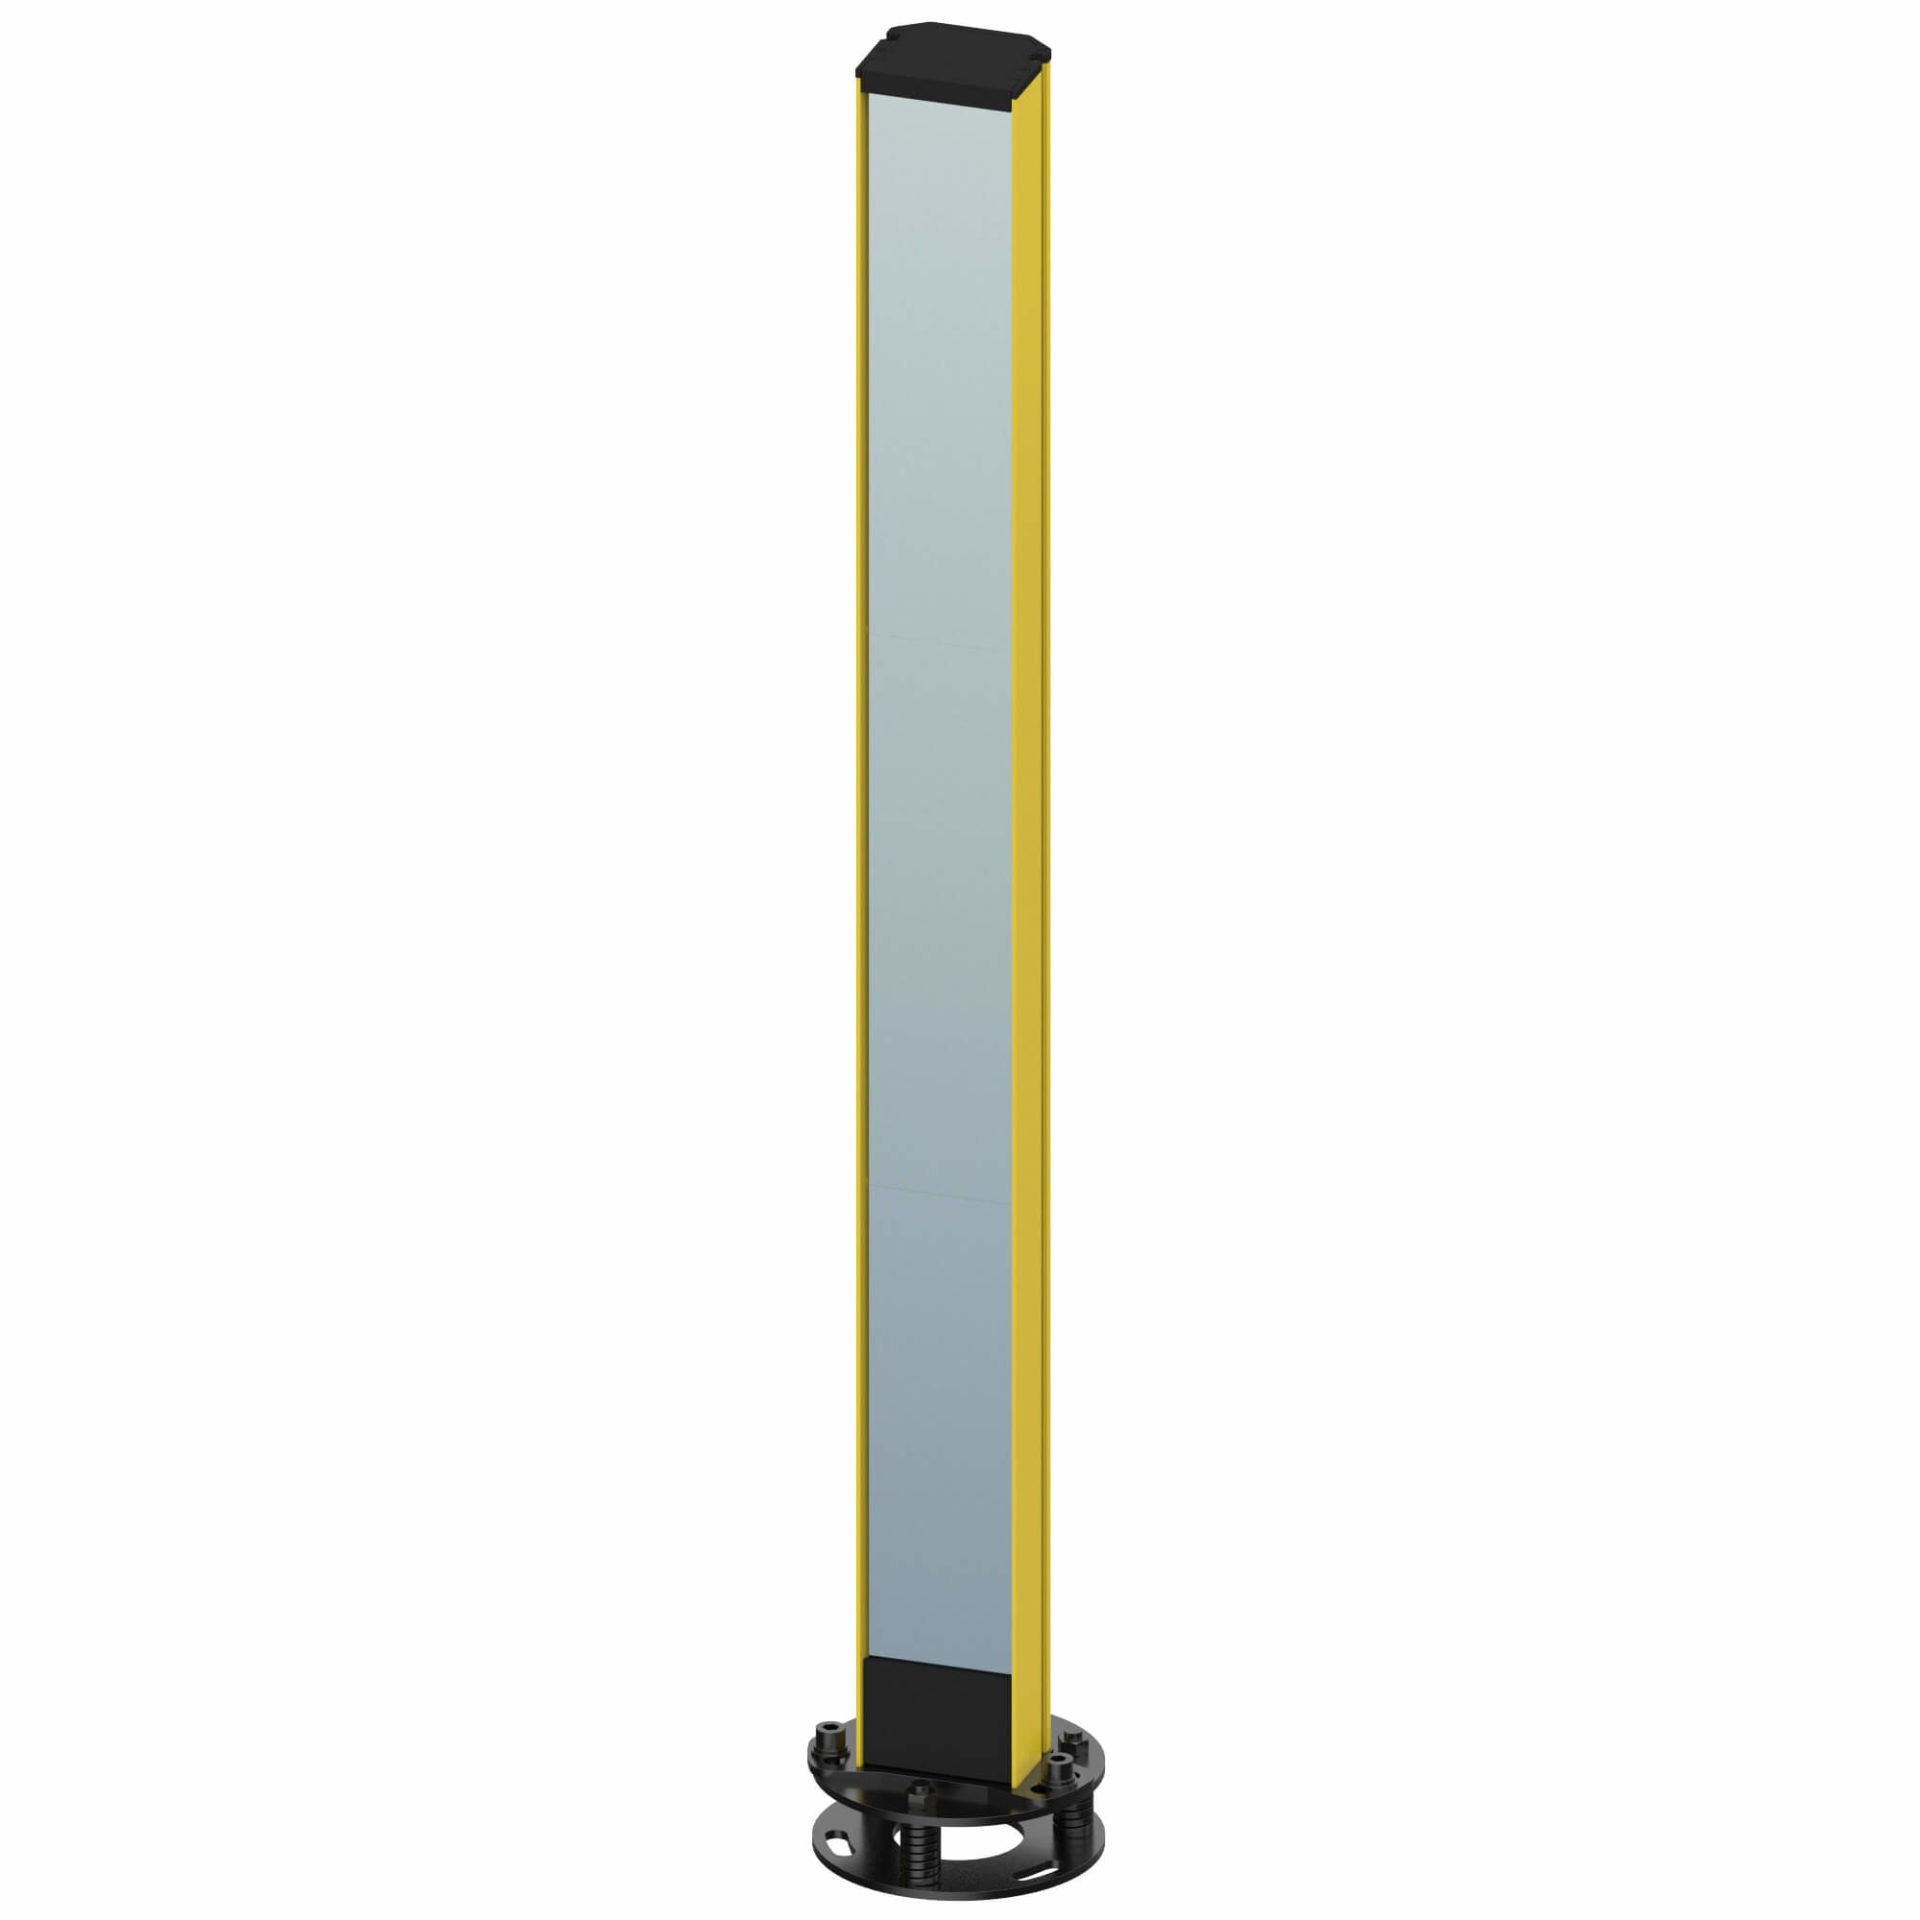 Omron - F39-SML1630  Mirror column 1630 mm for Safety Light Curtain F3SG-SR/PG up to 1440 mm